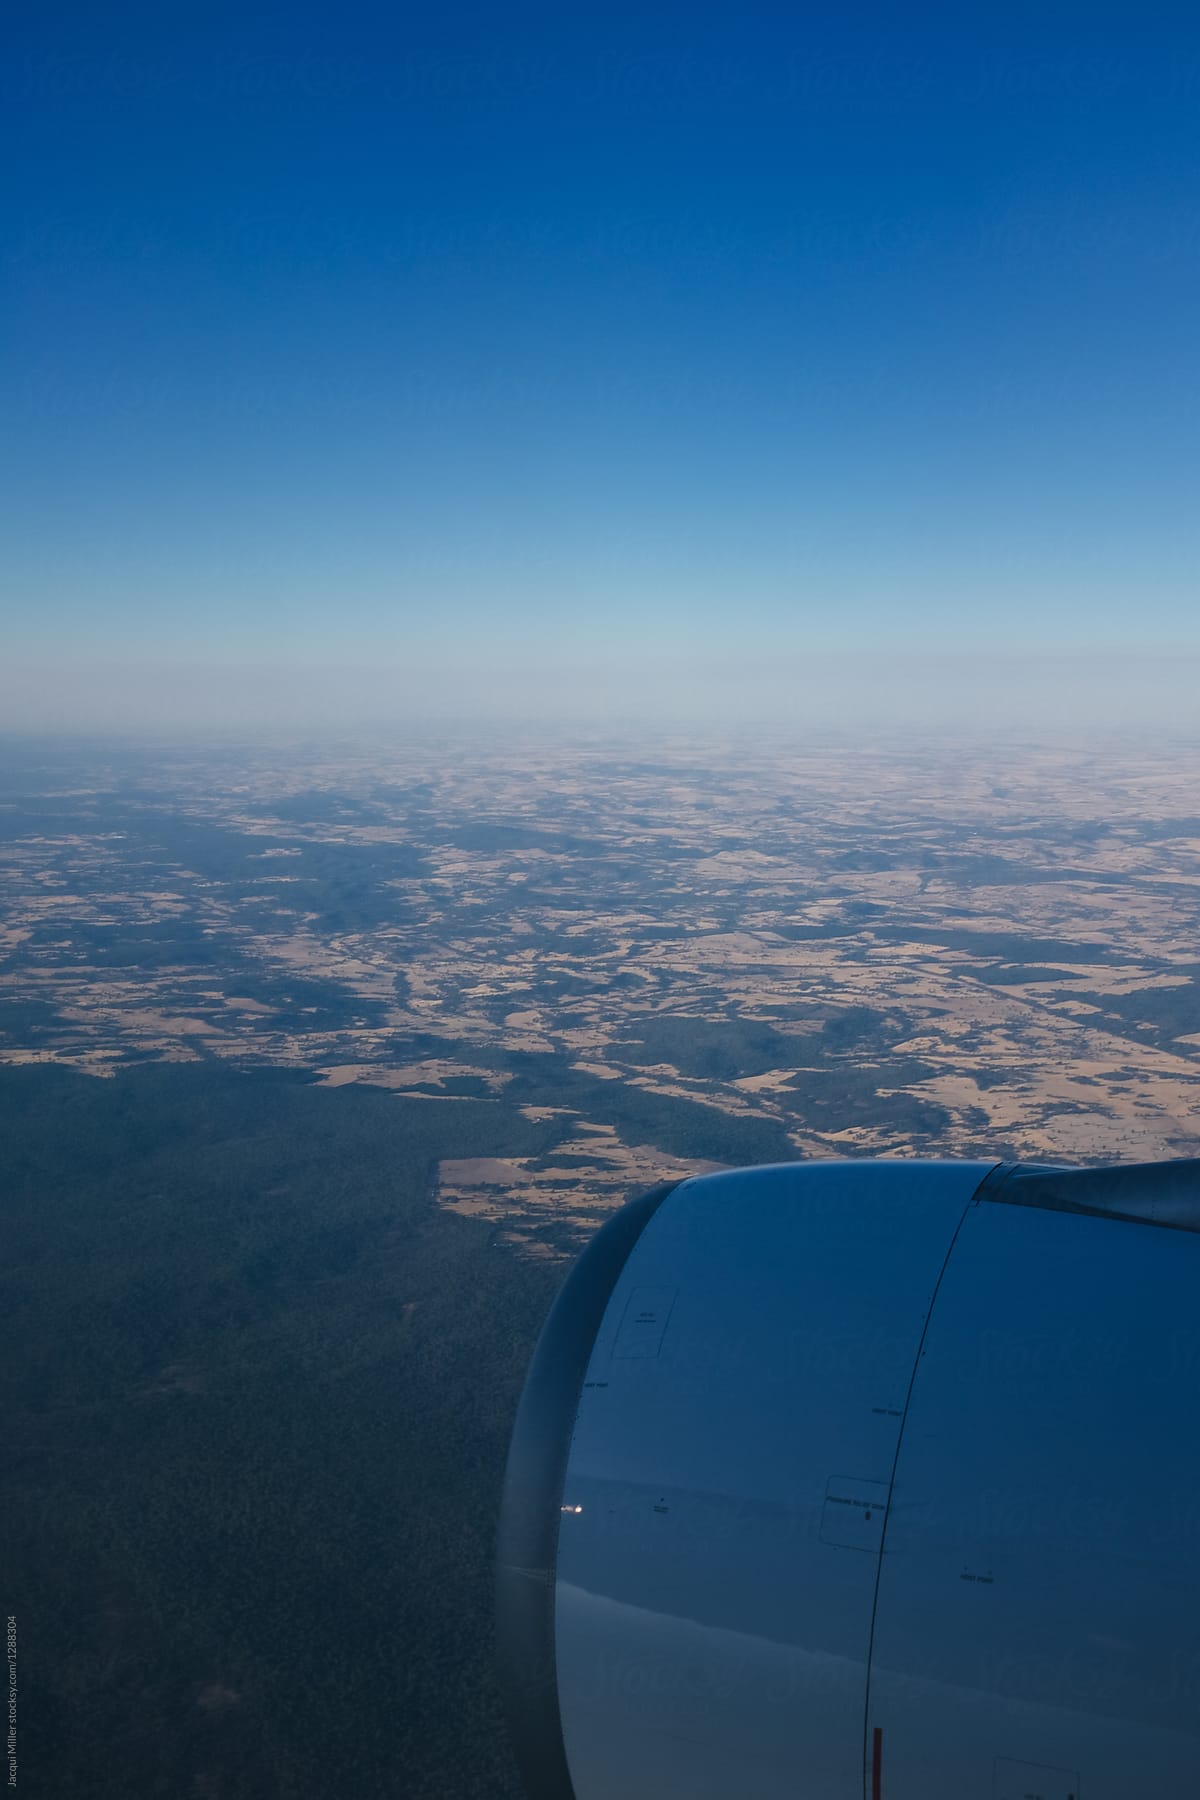 Flying toward Perth, Western Australia, with smoke or dust on the horizon